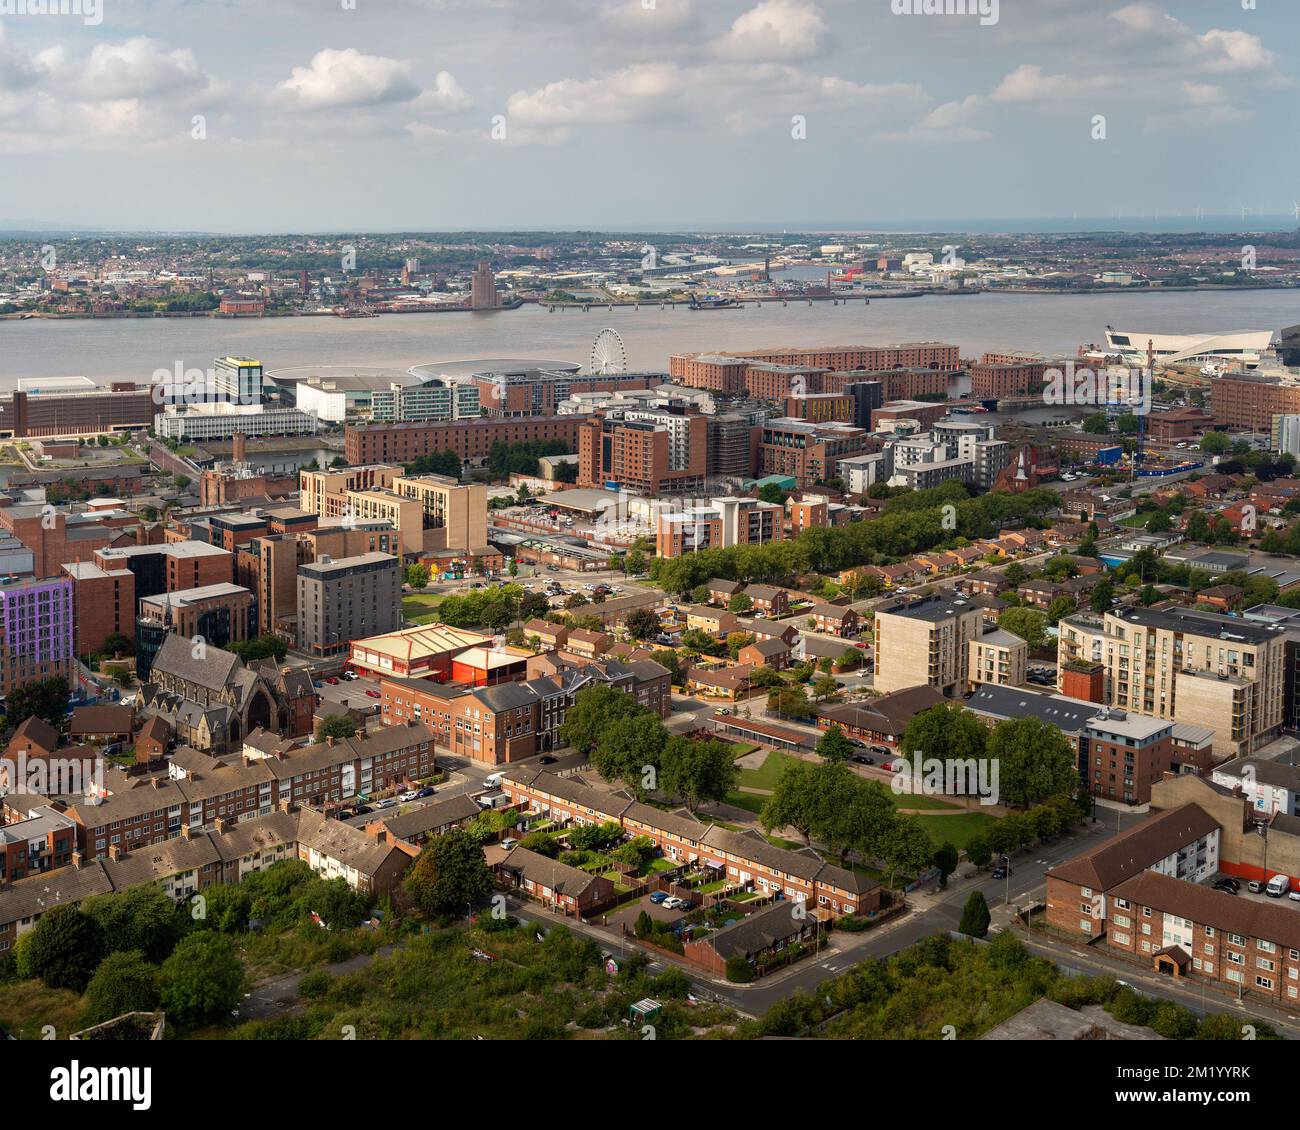 Liverpool, UK: Aerial view of City Centre South, including Great George Square and Albert Dock next to the River Mersey Stock Photo